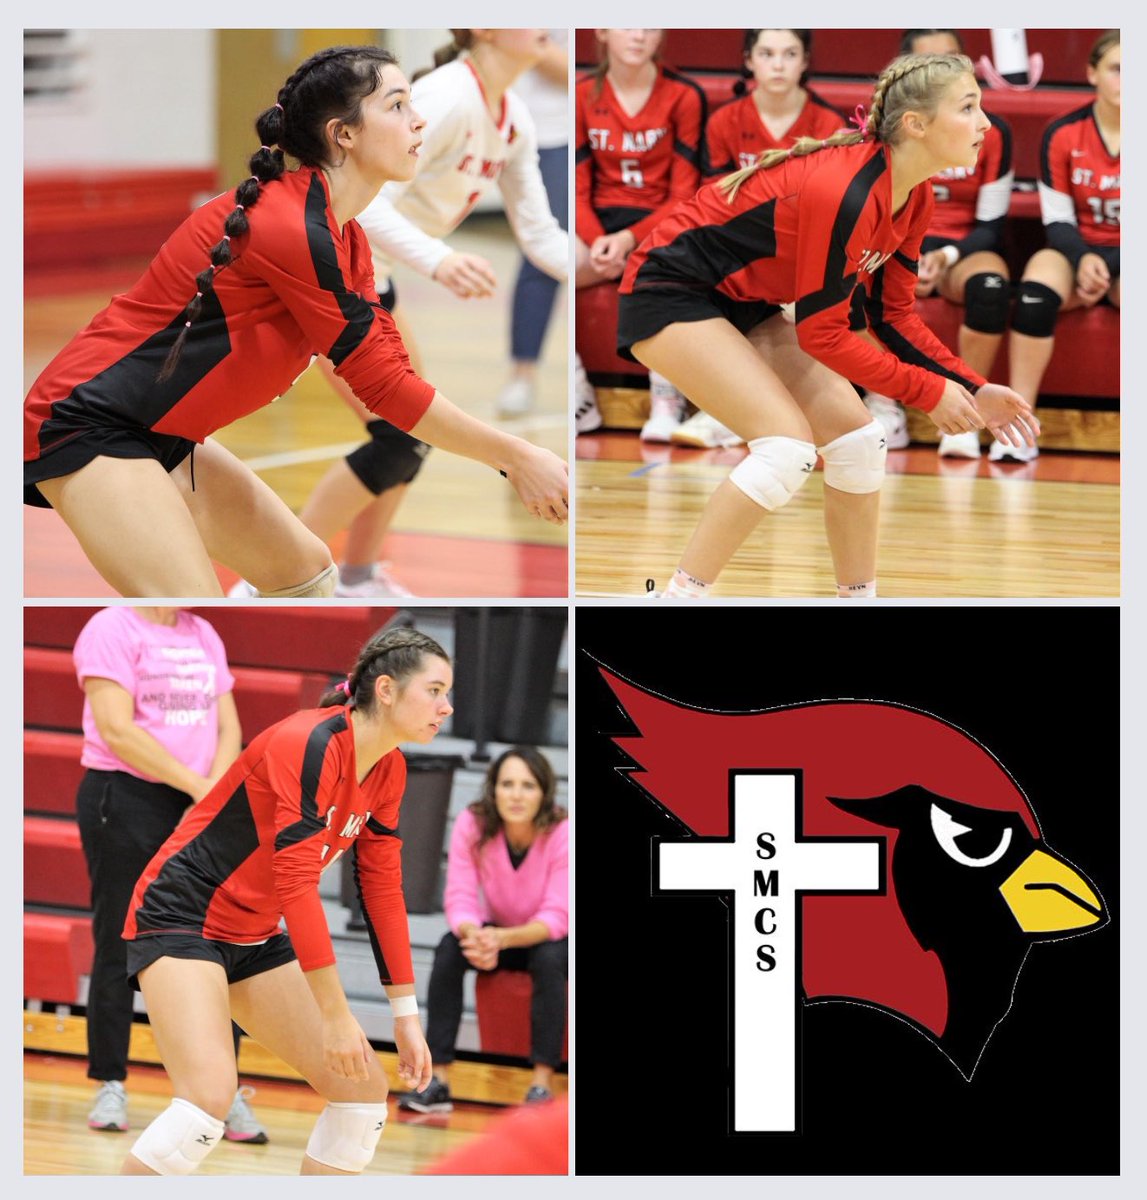 Great group of Sophomores! #CardinalVolleyball
@BriannaG2025 -MH; @MadalaHanson1 -DS; Megan-MH; Aubry-DS; Jodie-OH; and Maddie-MH